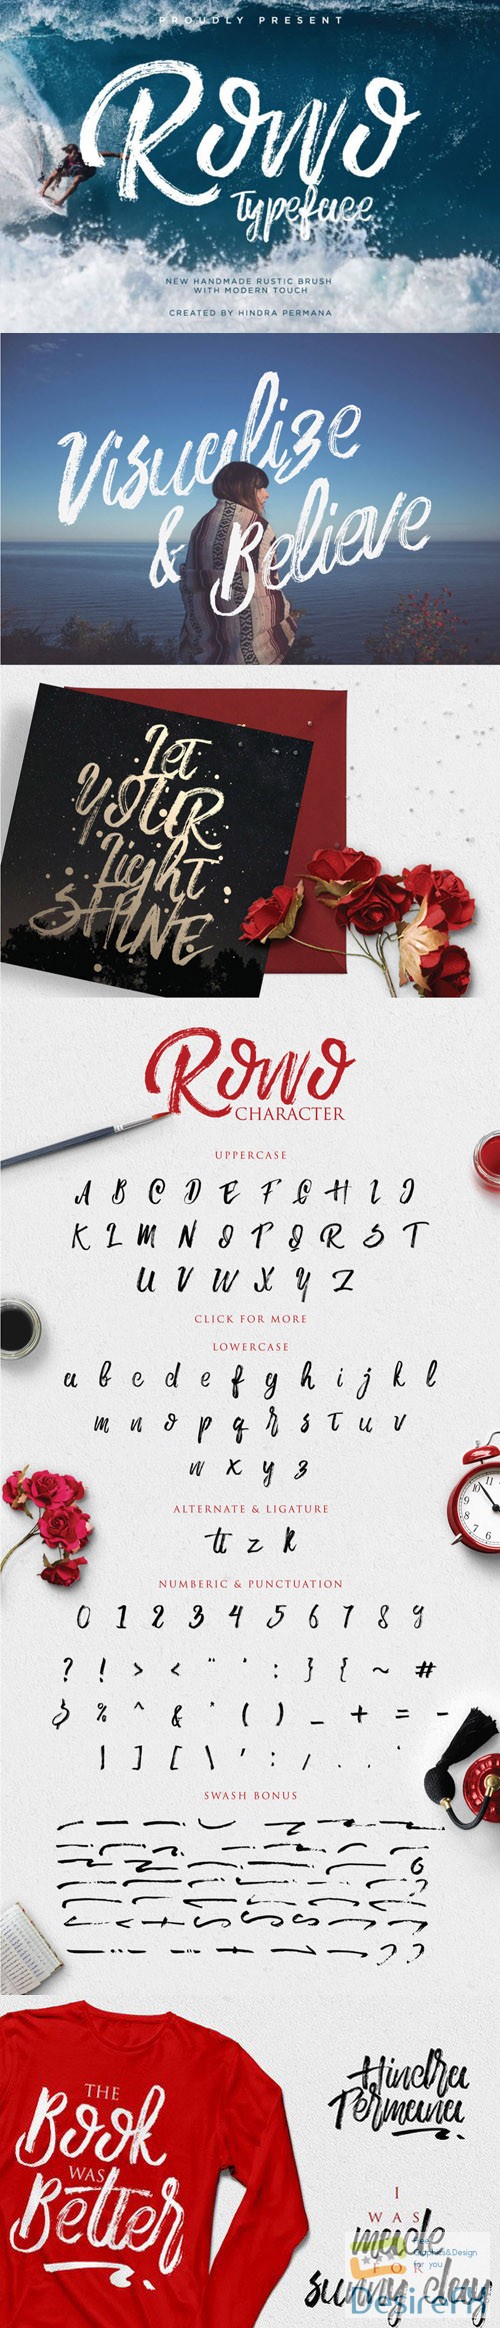 ROWO Typeface - New Handmade Rustic Brush with Modern Touch